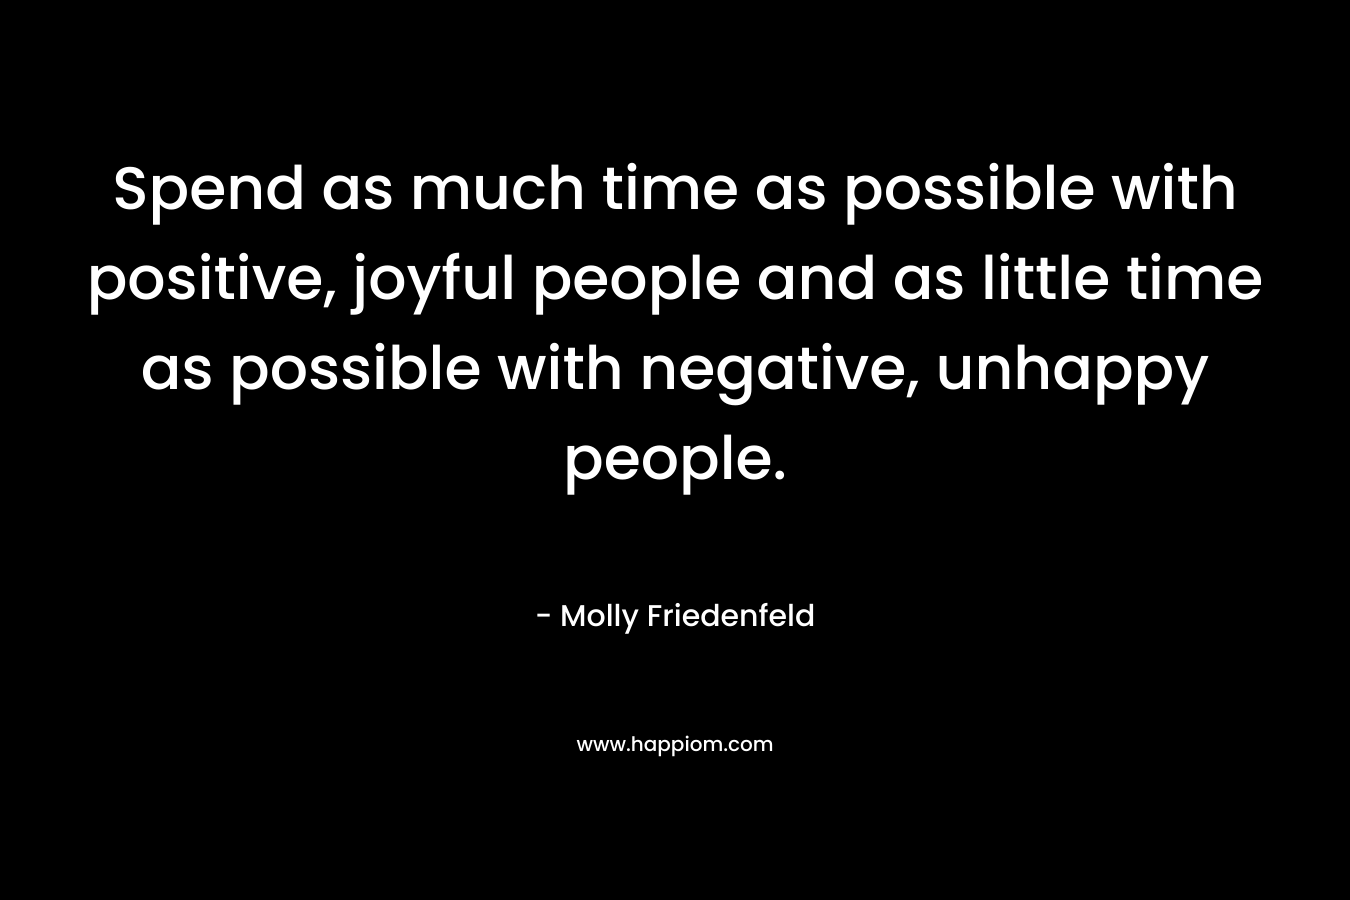 Spend as much time as possible with positive, joyful people and as little time as possible with negative, unhappy people. – Molly Friedenfeld